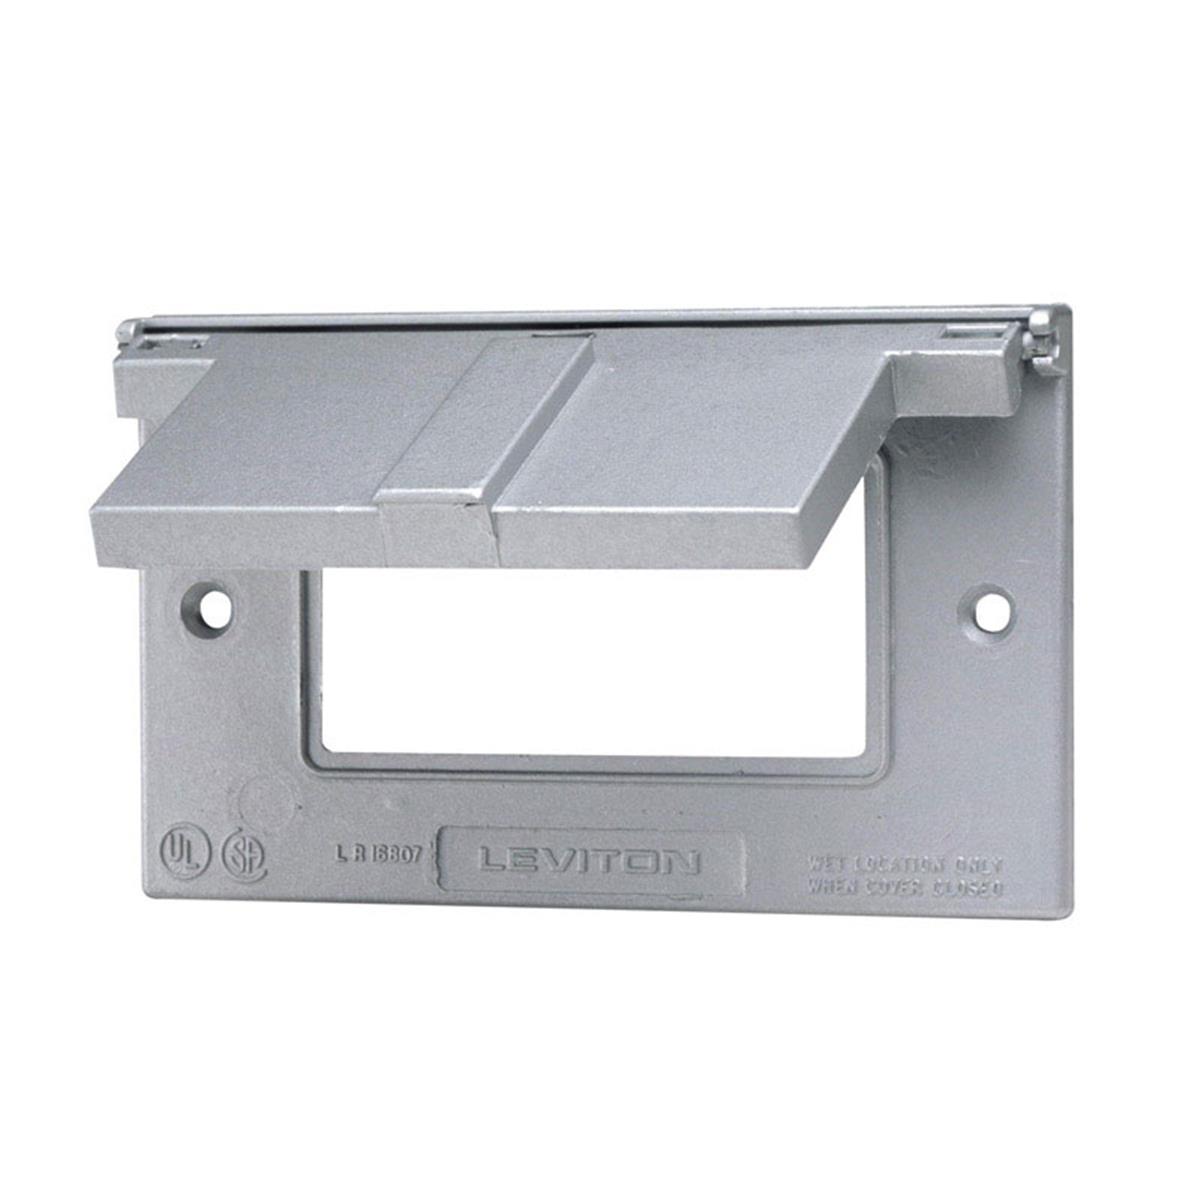 04996-0gy 1-gang Thermoplastic Cover